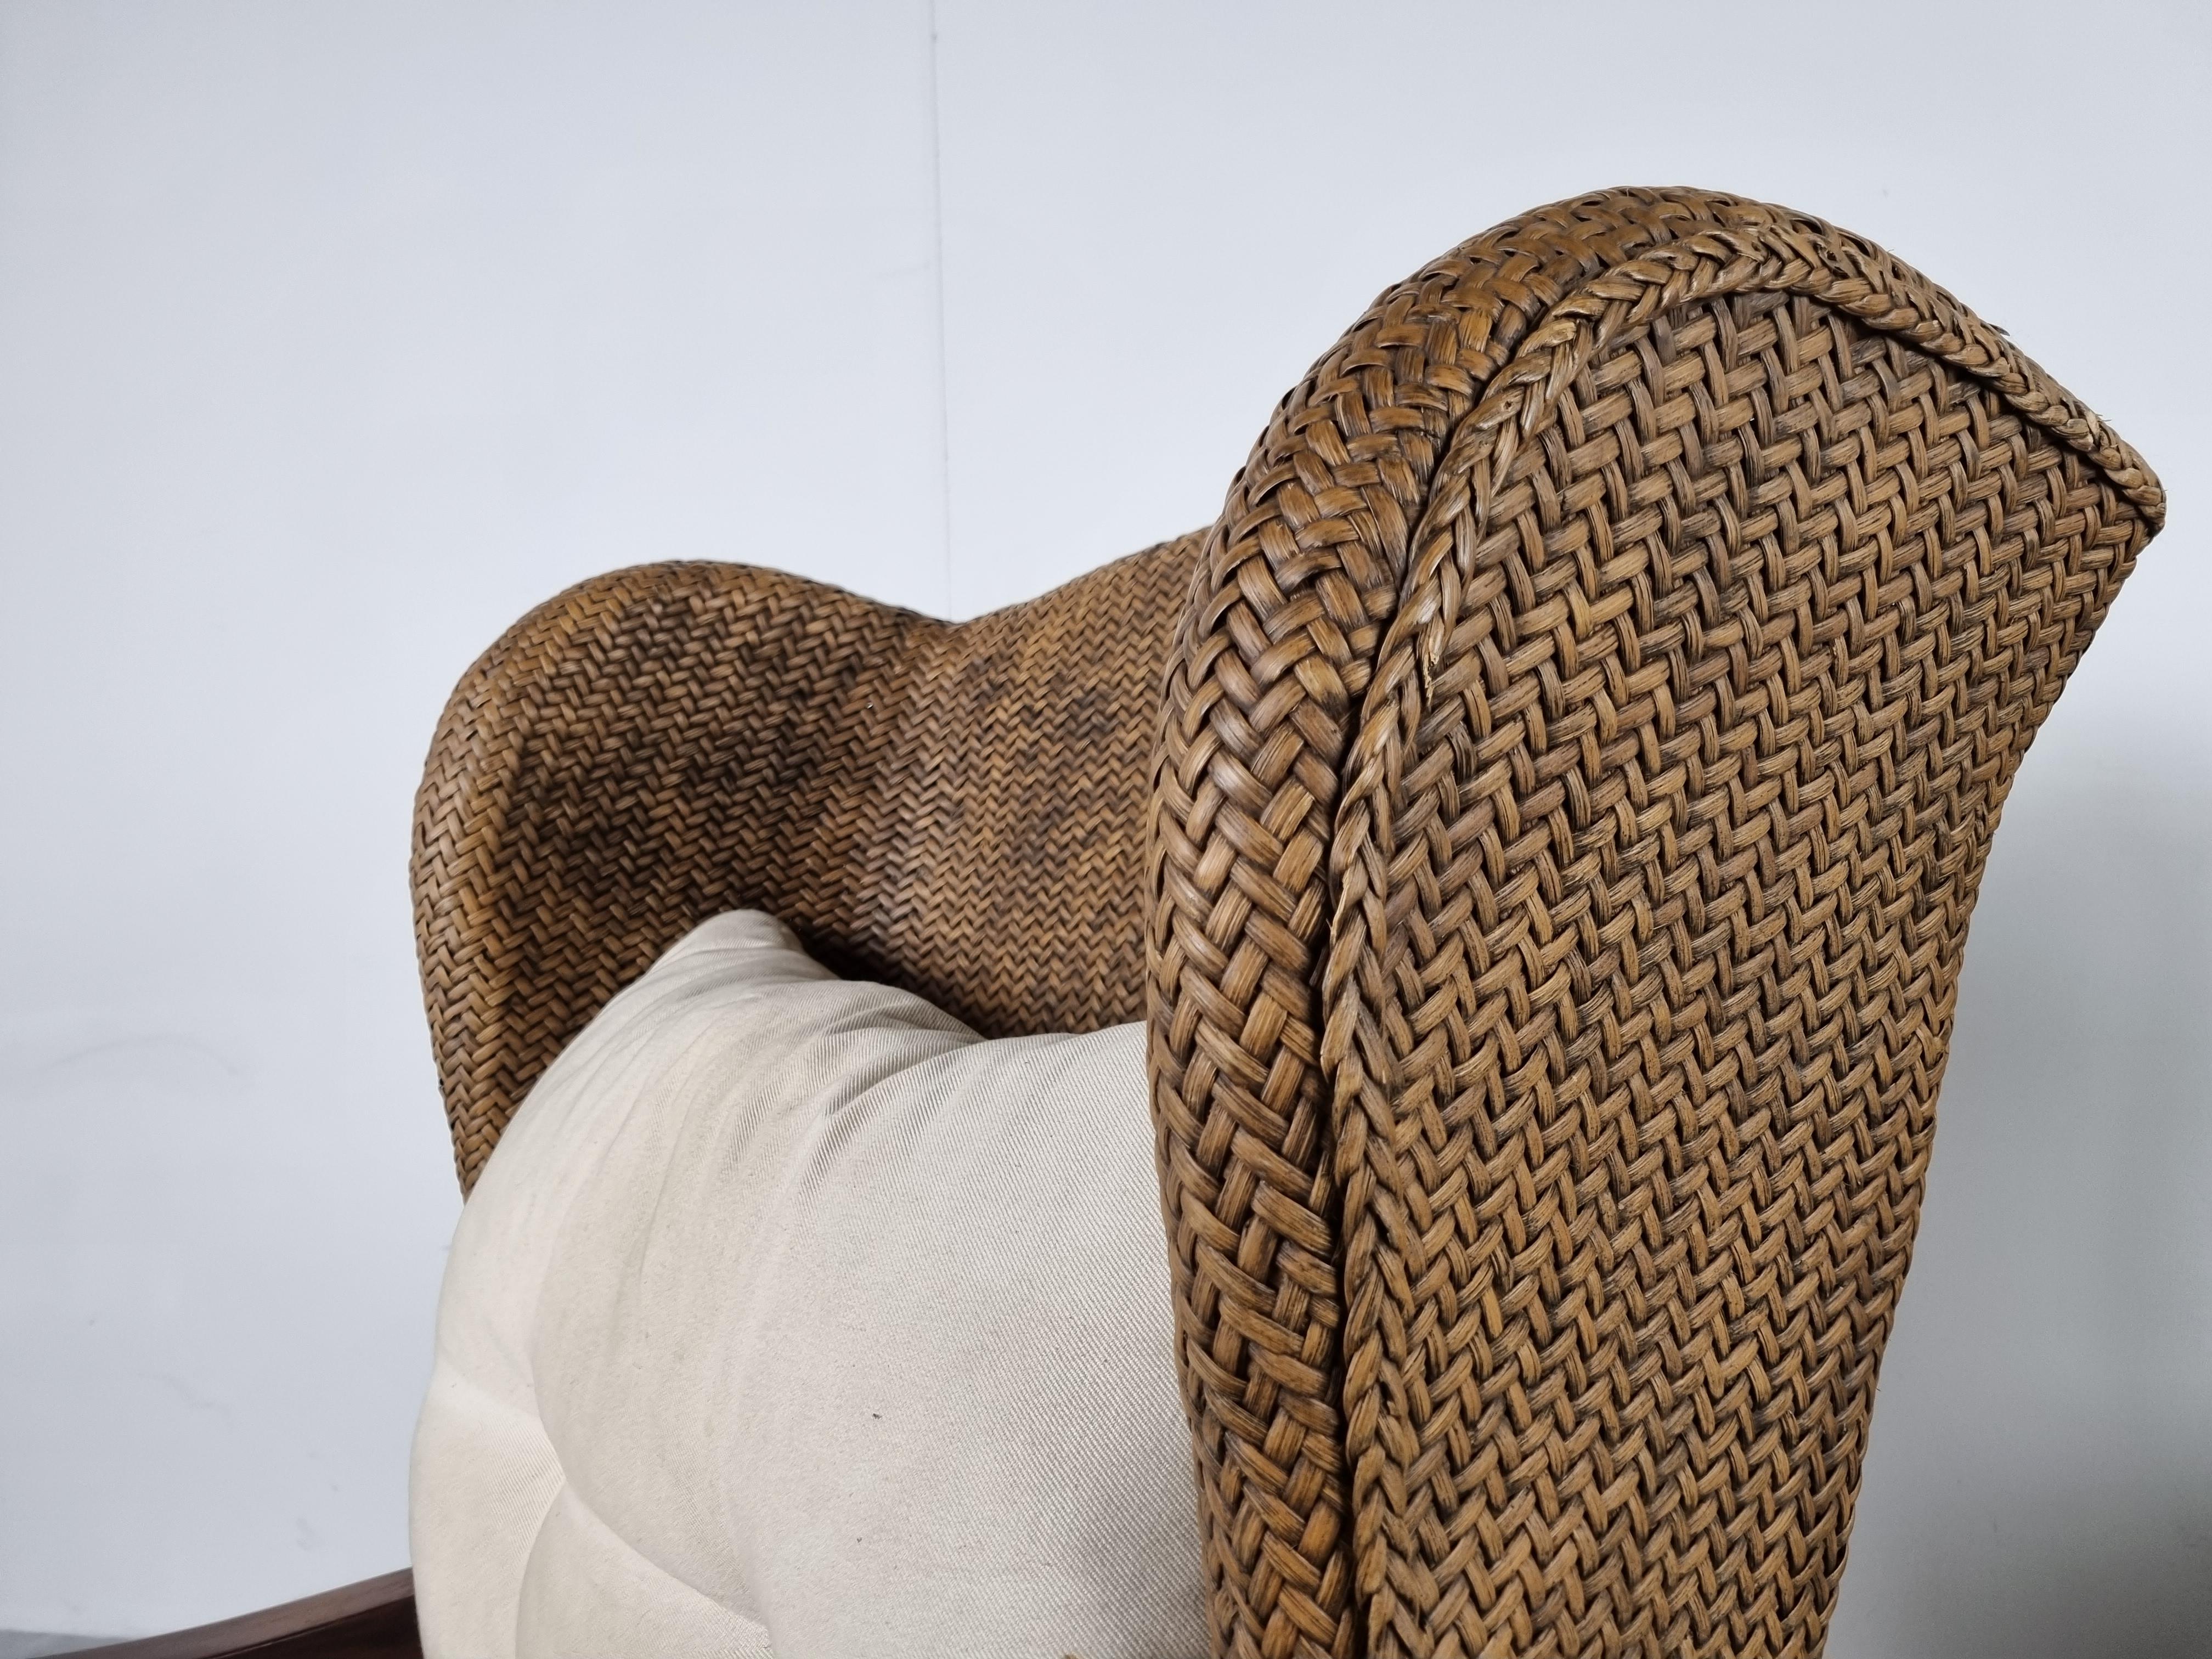 Very charming wingback chairsm adefrom braided wiker and bamboo.

Elegantly shaped chairs with wooden armrests.

The cushions are non original and can be replaced if needed.

1950s - France

Good overall condition, cushions are comfortable